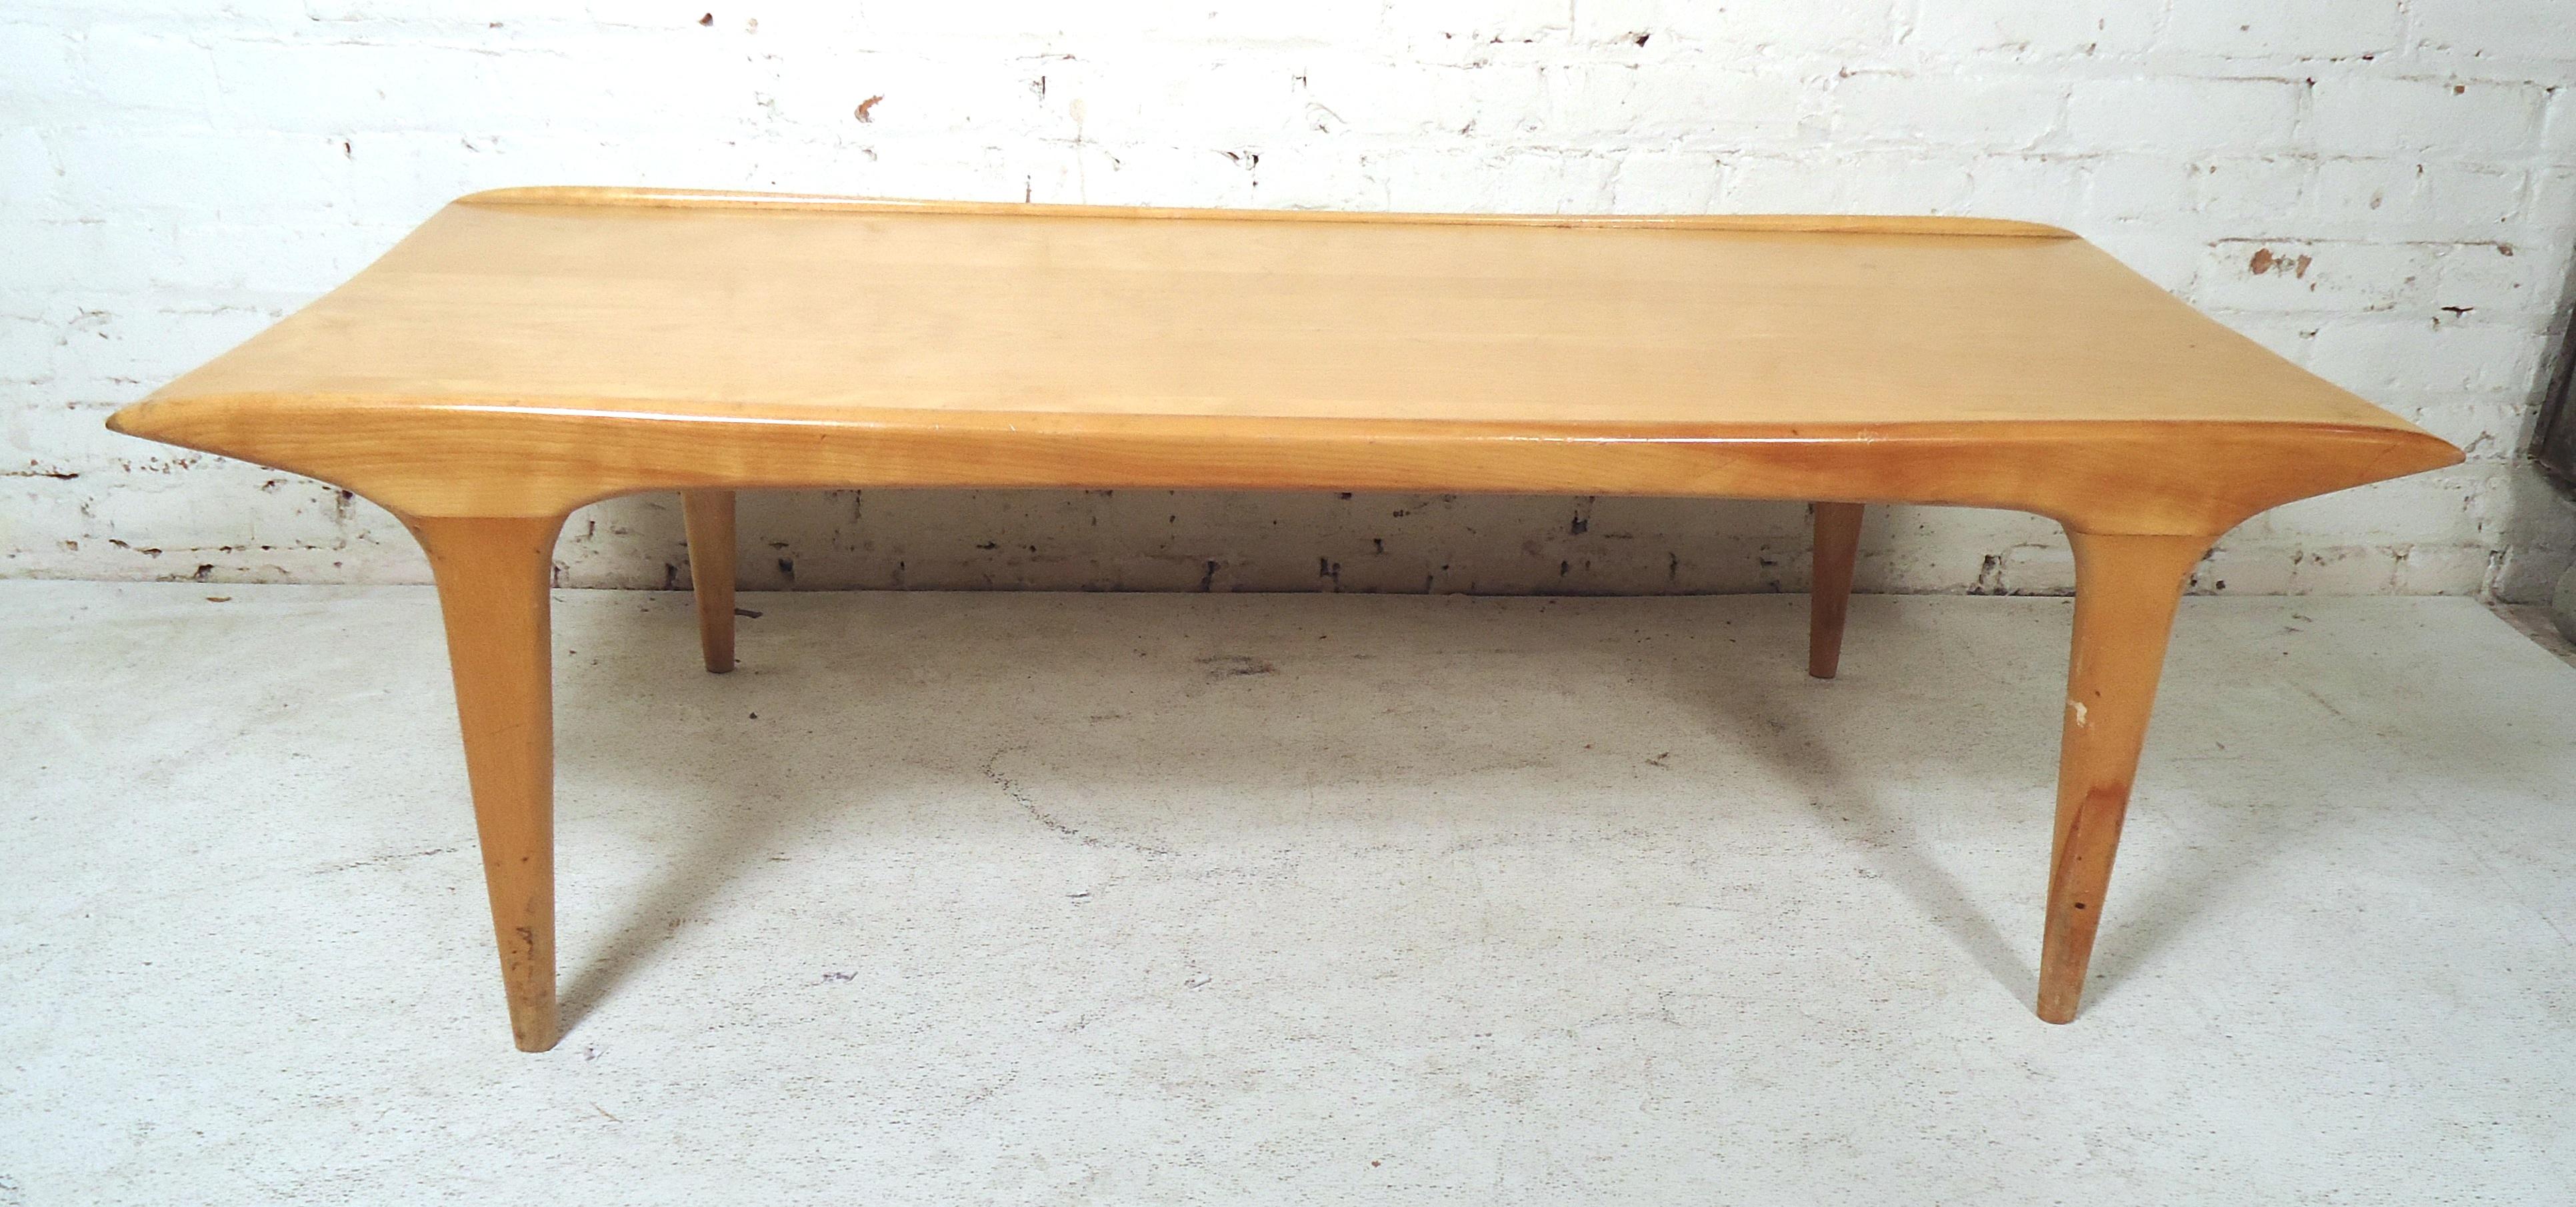 Gorgeous Mid-Century Modern coffee table featured in rich maple grain.

Please confirm item location (NY or NJ).